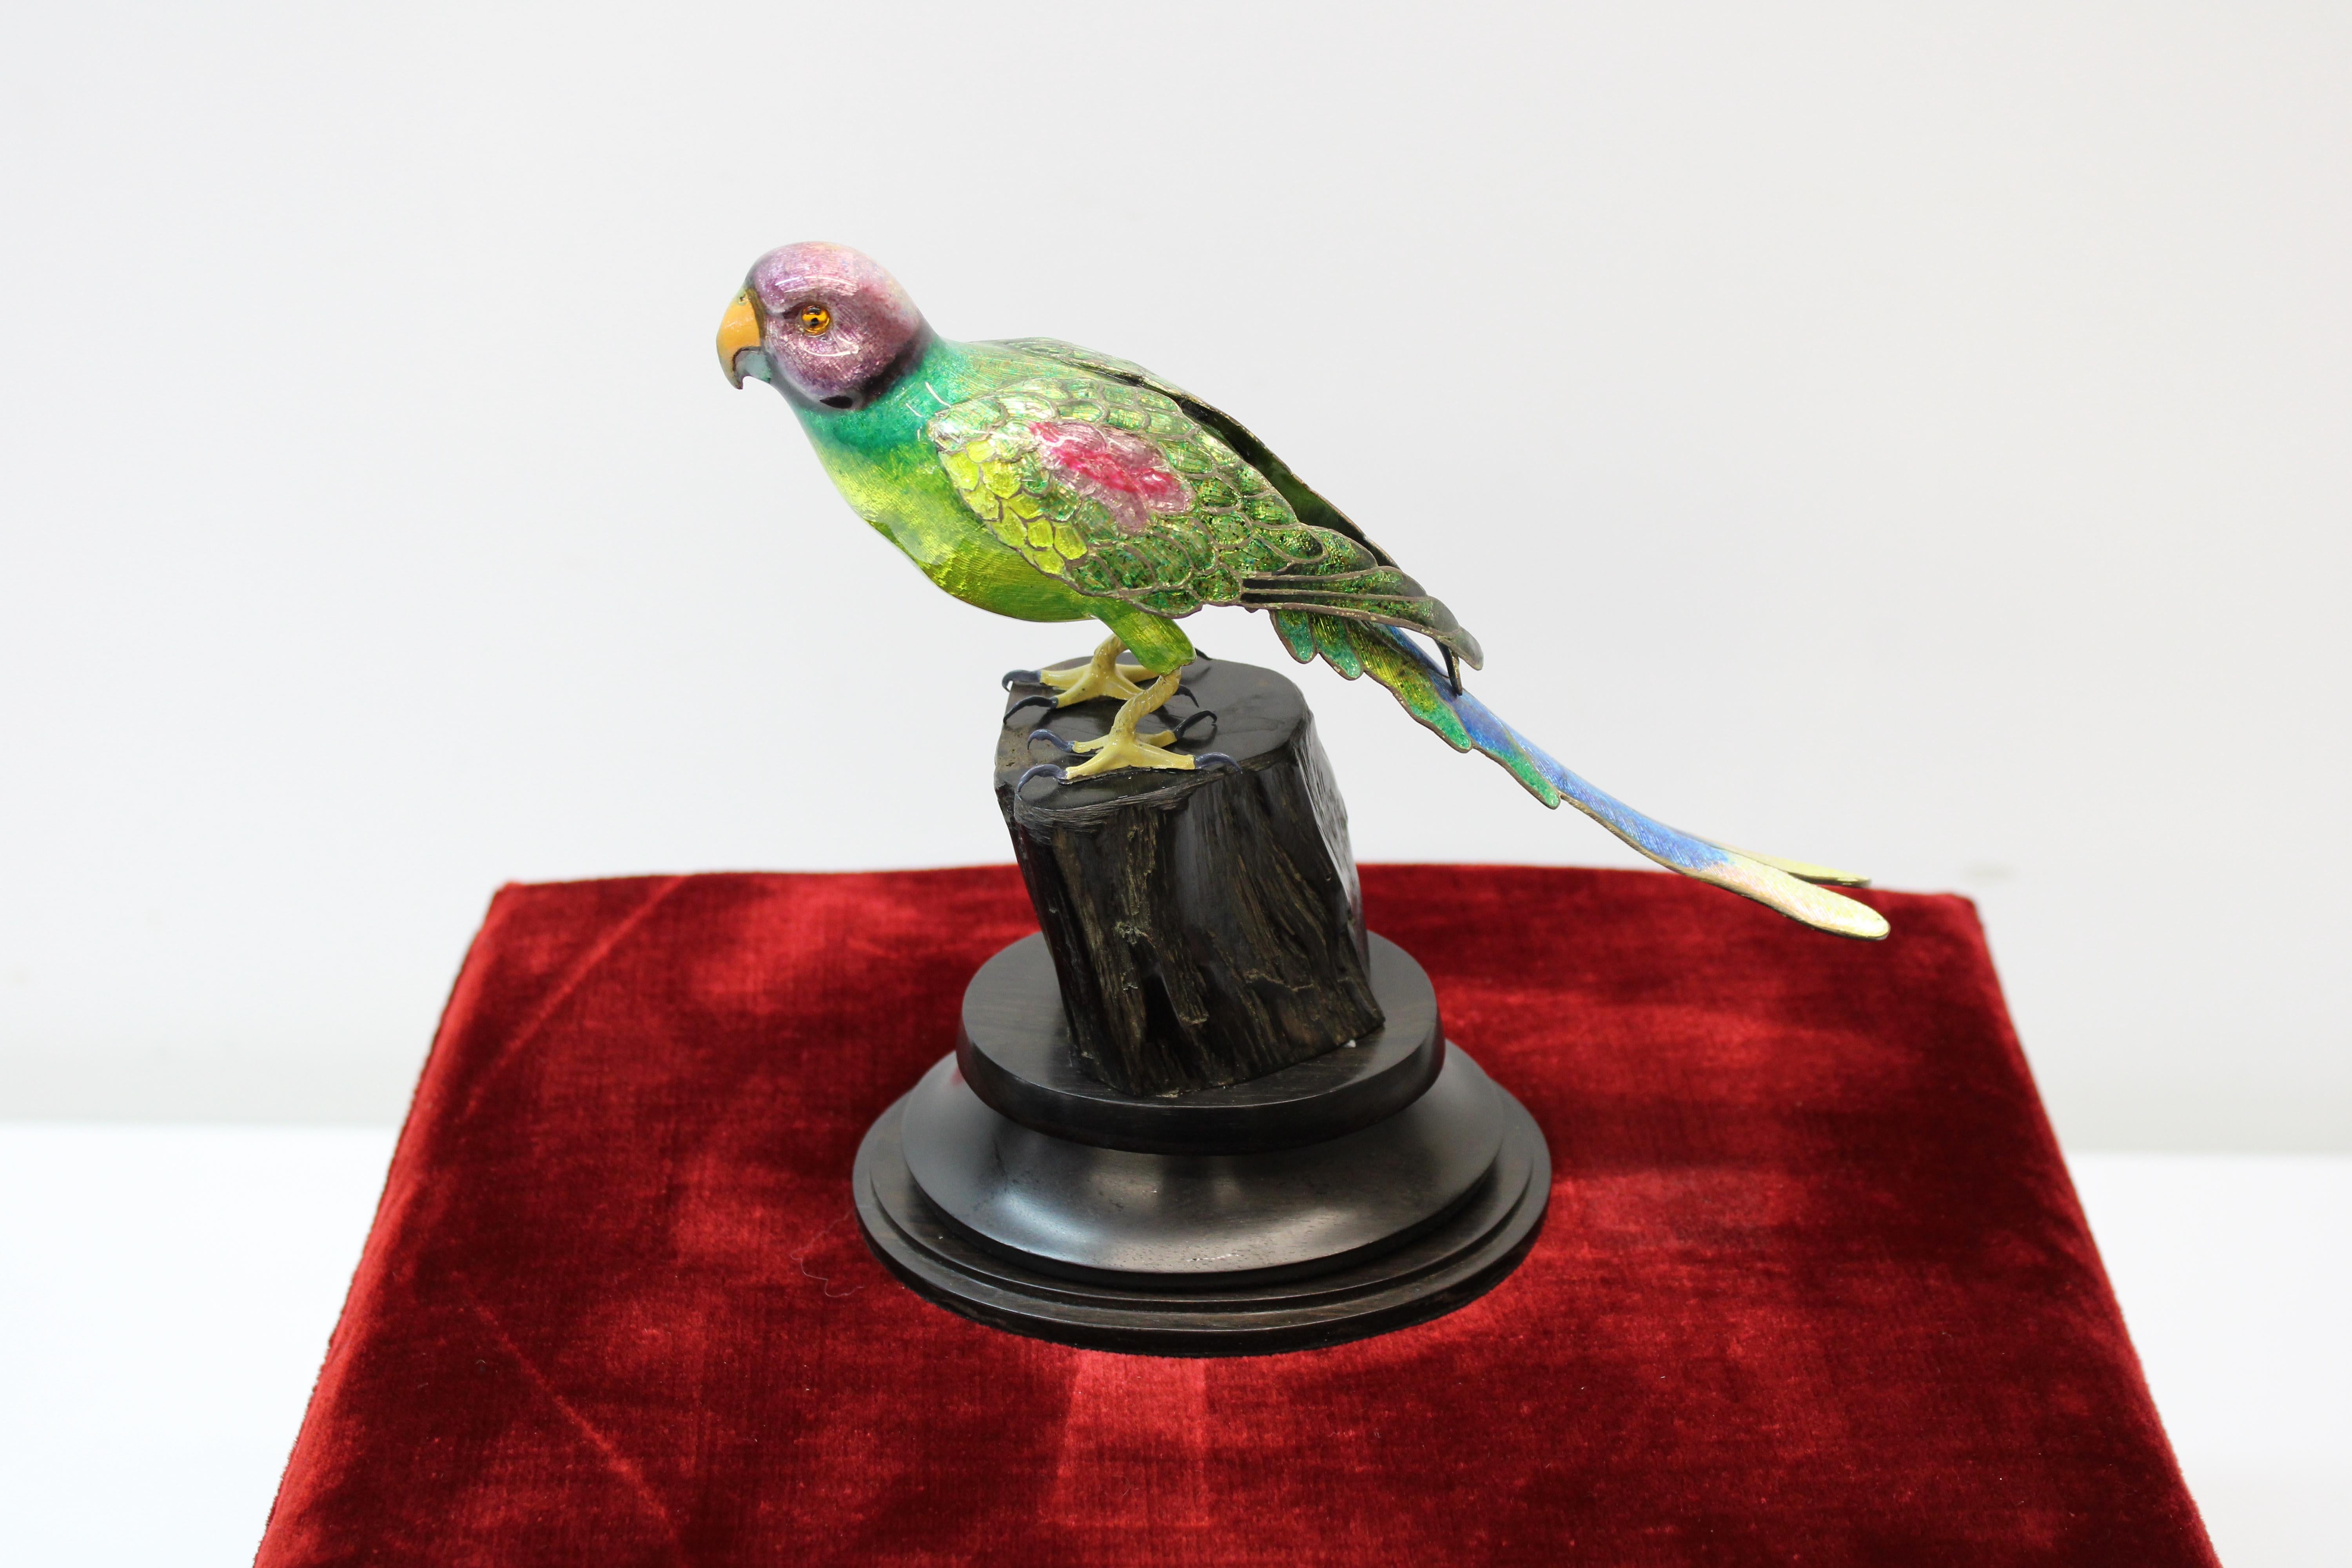 Silver Francesco Rigozzi Hand Crafted Parrot For Sale